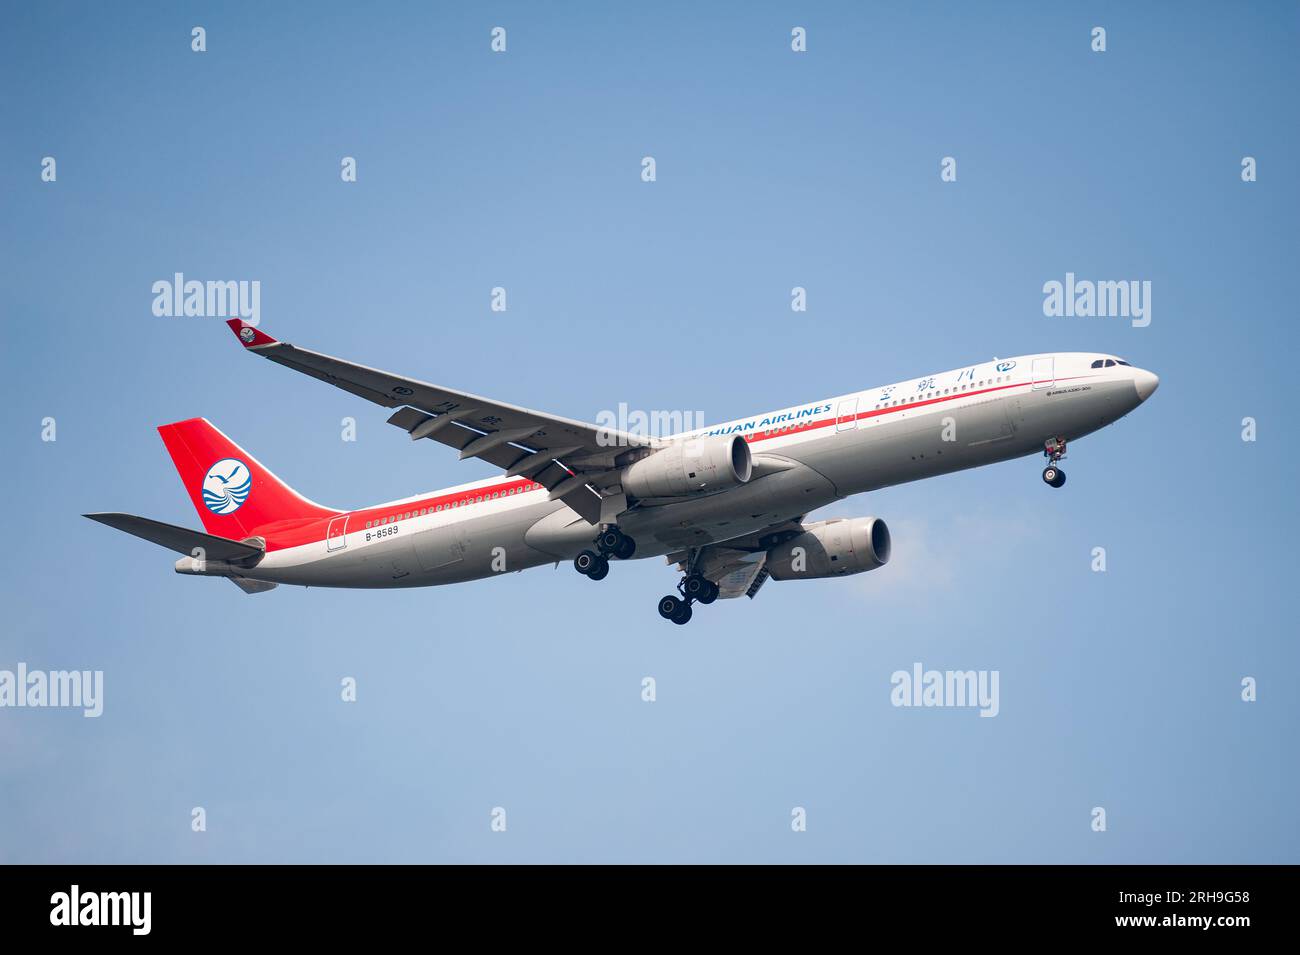 26.07.2023, Singapore, Republic of Singapore, Asia - A Sichuan Airlines Airbus A330-300 passenger aircraft approaches Changi Airport for landing. Stock Photo